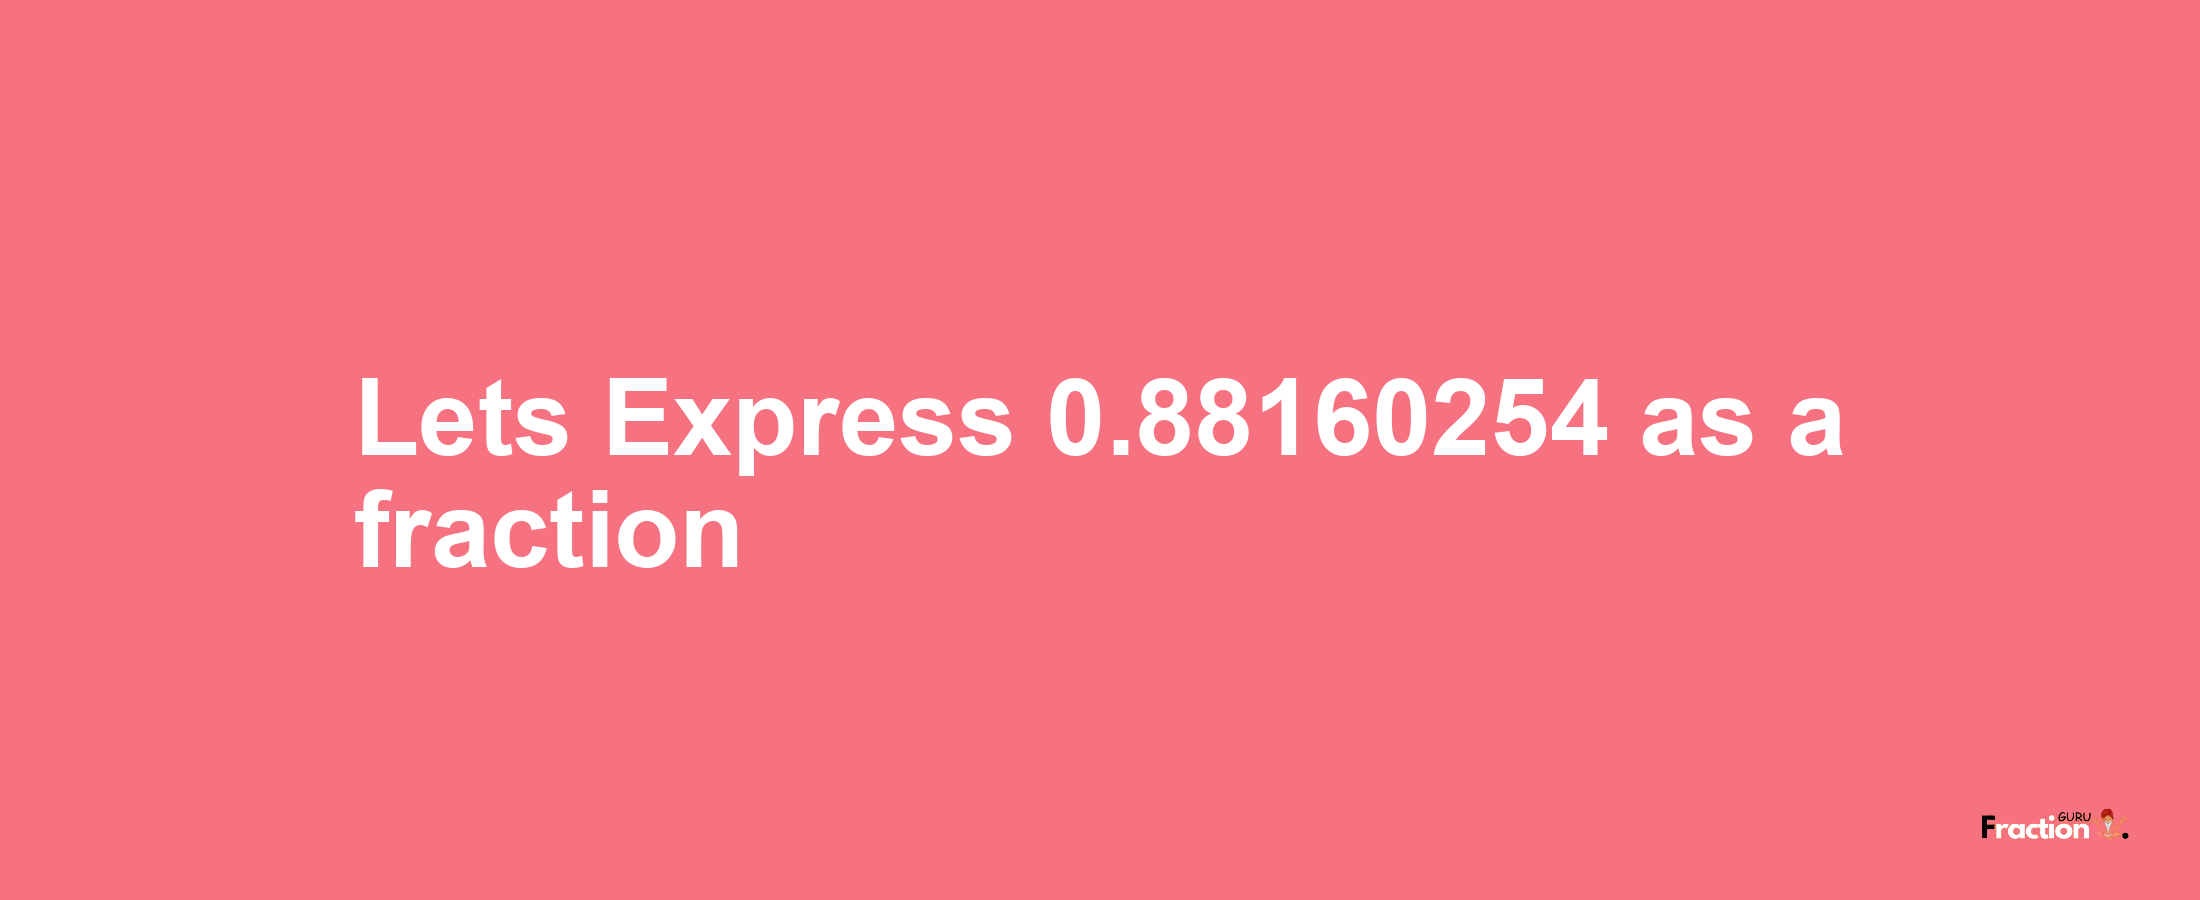 Lets Express 0.88160254 as afraction